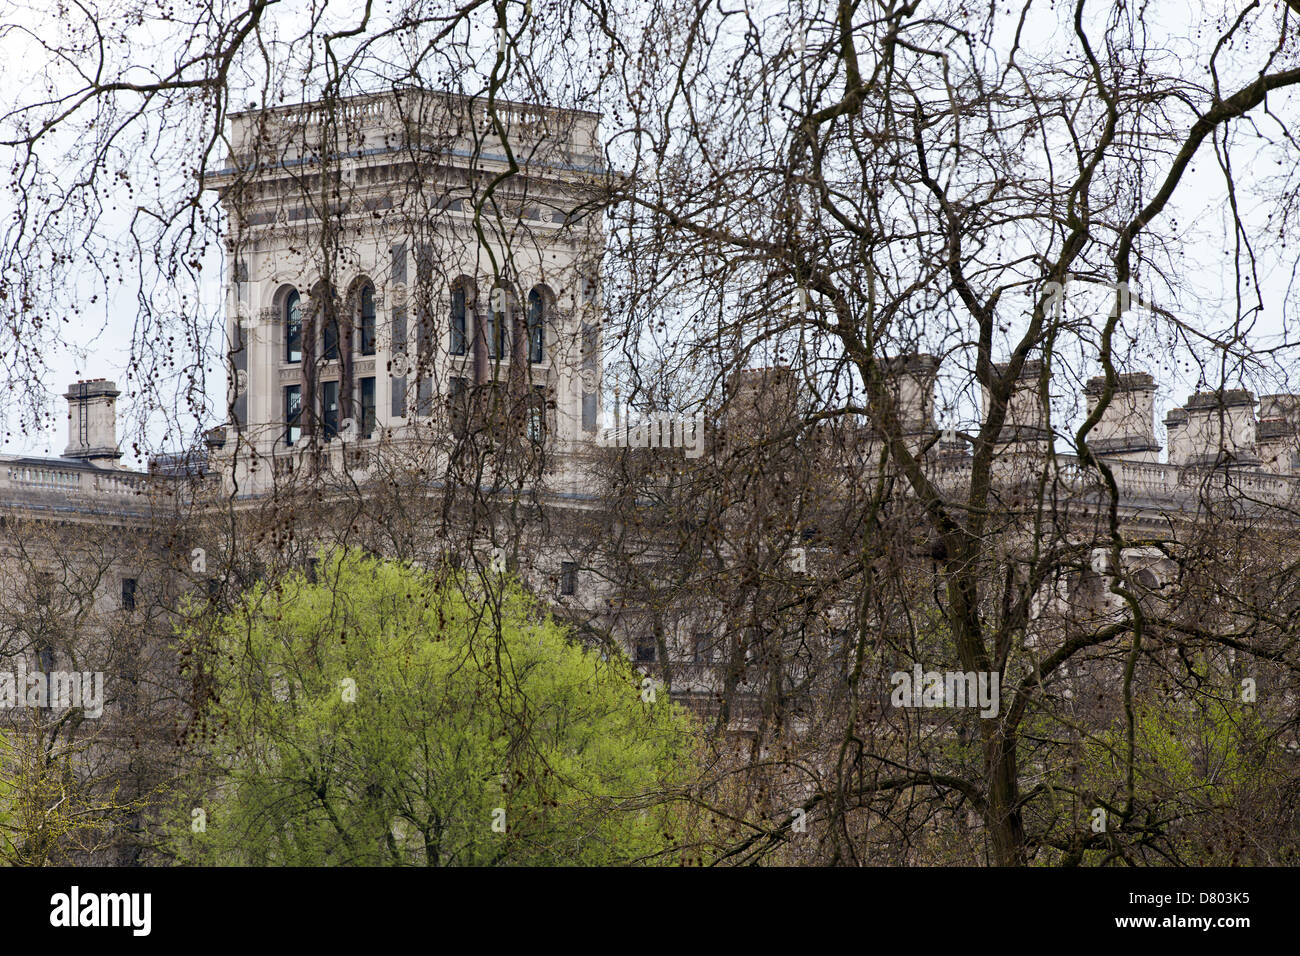 View on London ancient architecture from the Saint James park in winter, London, United Kingdom Stock Photo